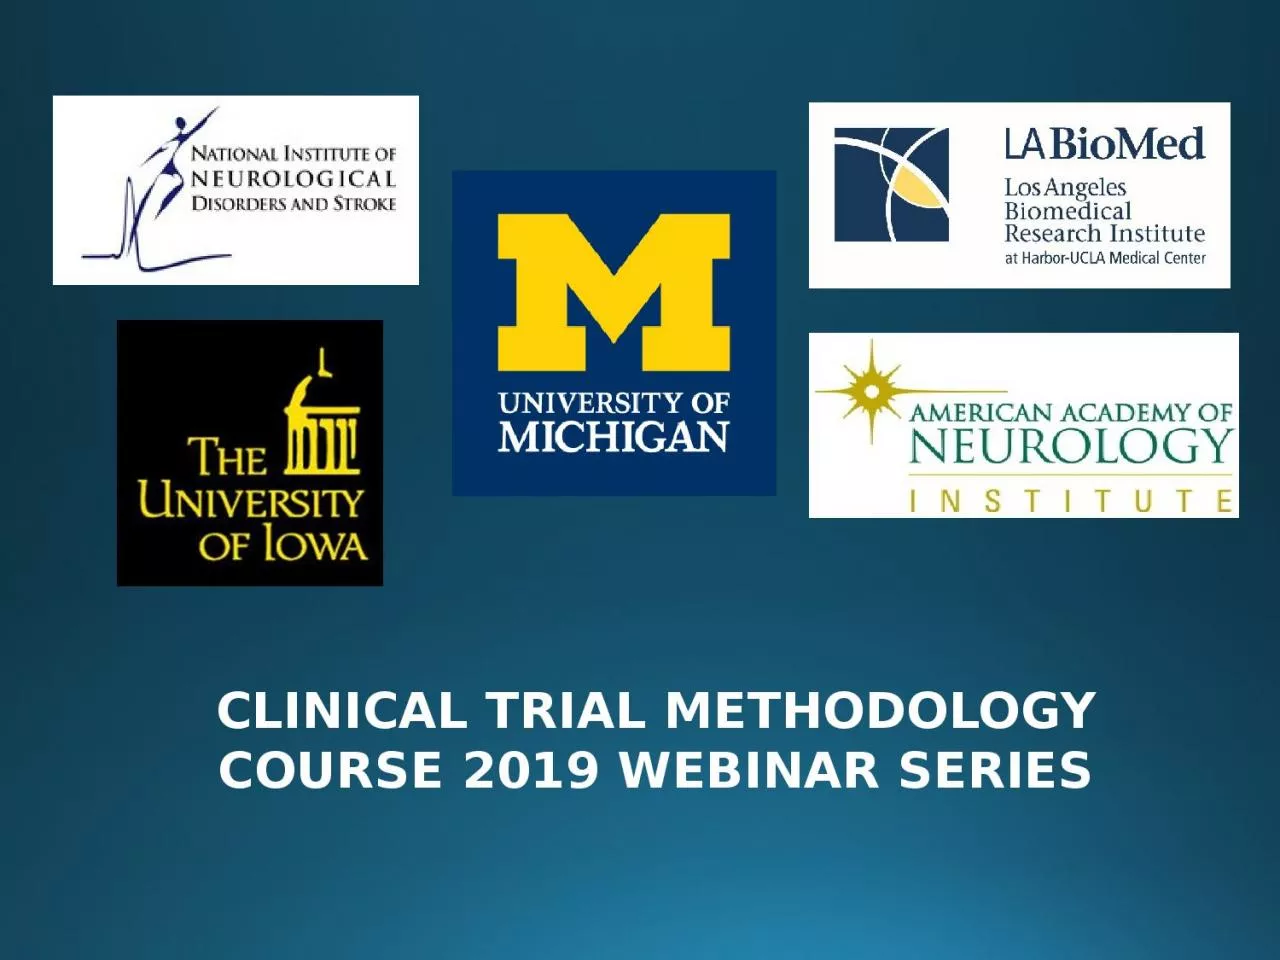 CLINICAL TRIAL METHODOLOGY COURSE